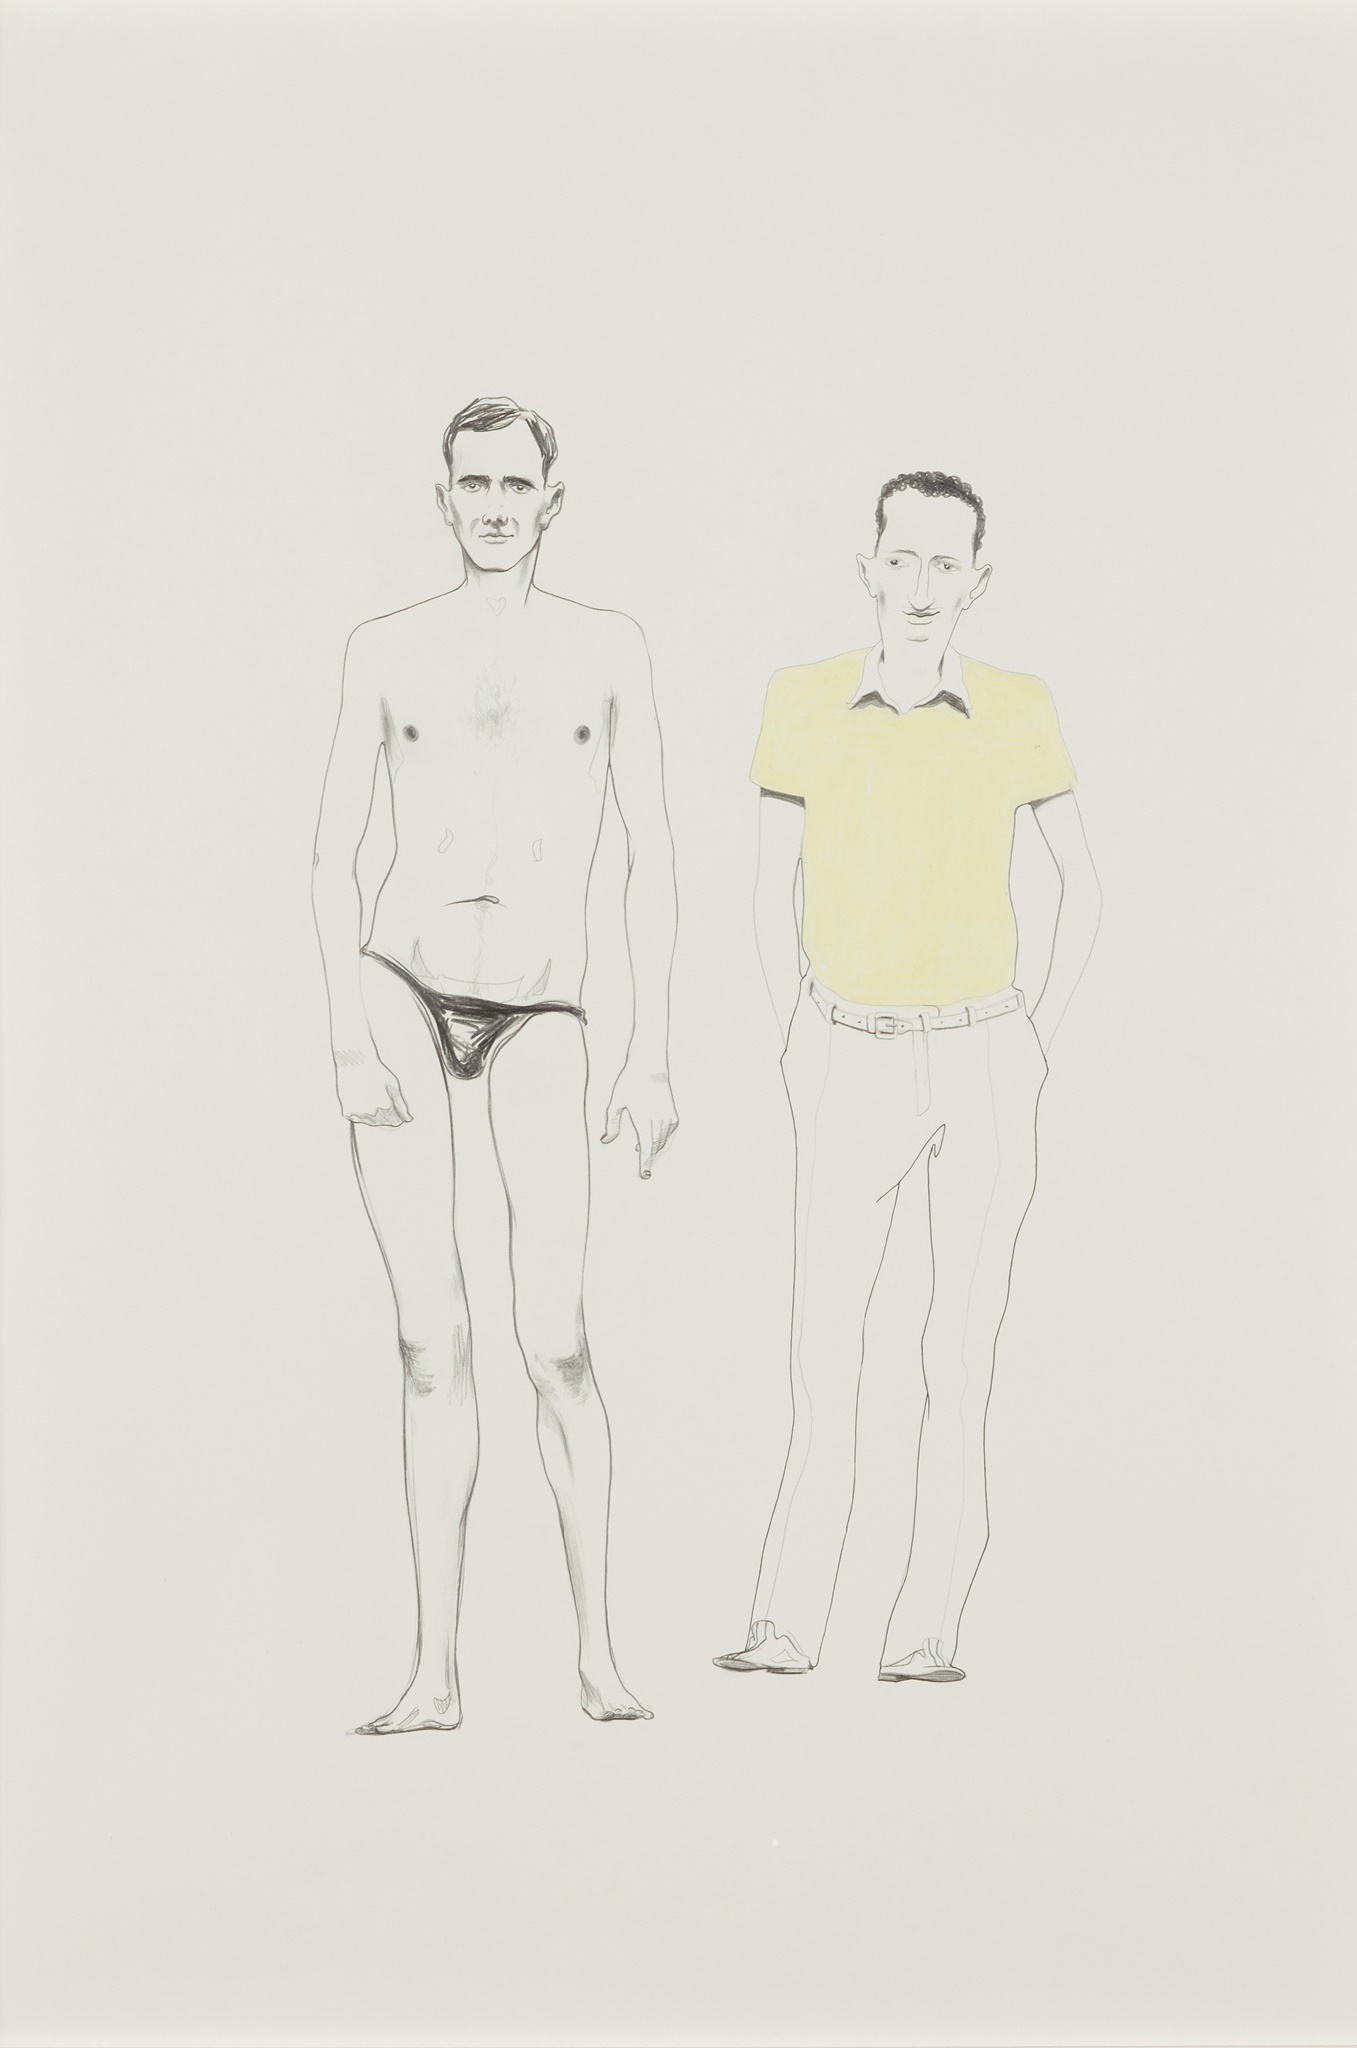 LOT 86 | § CHARLES AVERY (SCOTTISH 1973-) | UNTITLED (TWO FIGURES) | £1,000 - £1,500 + fees